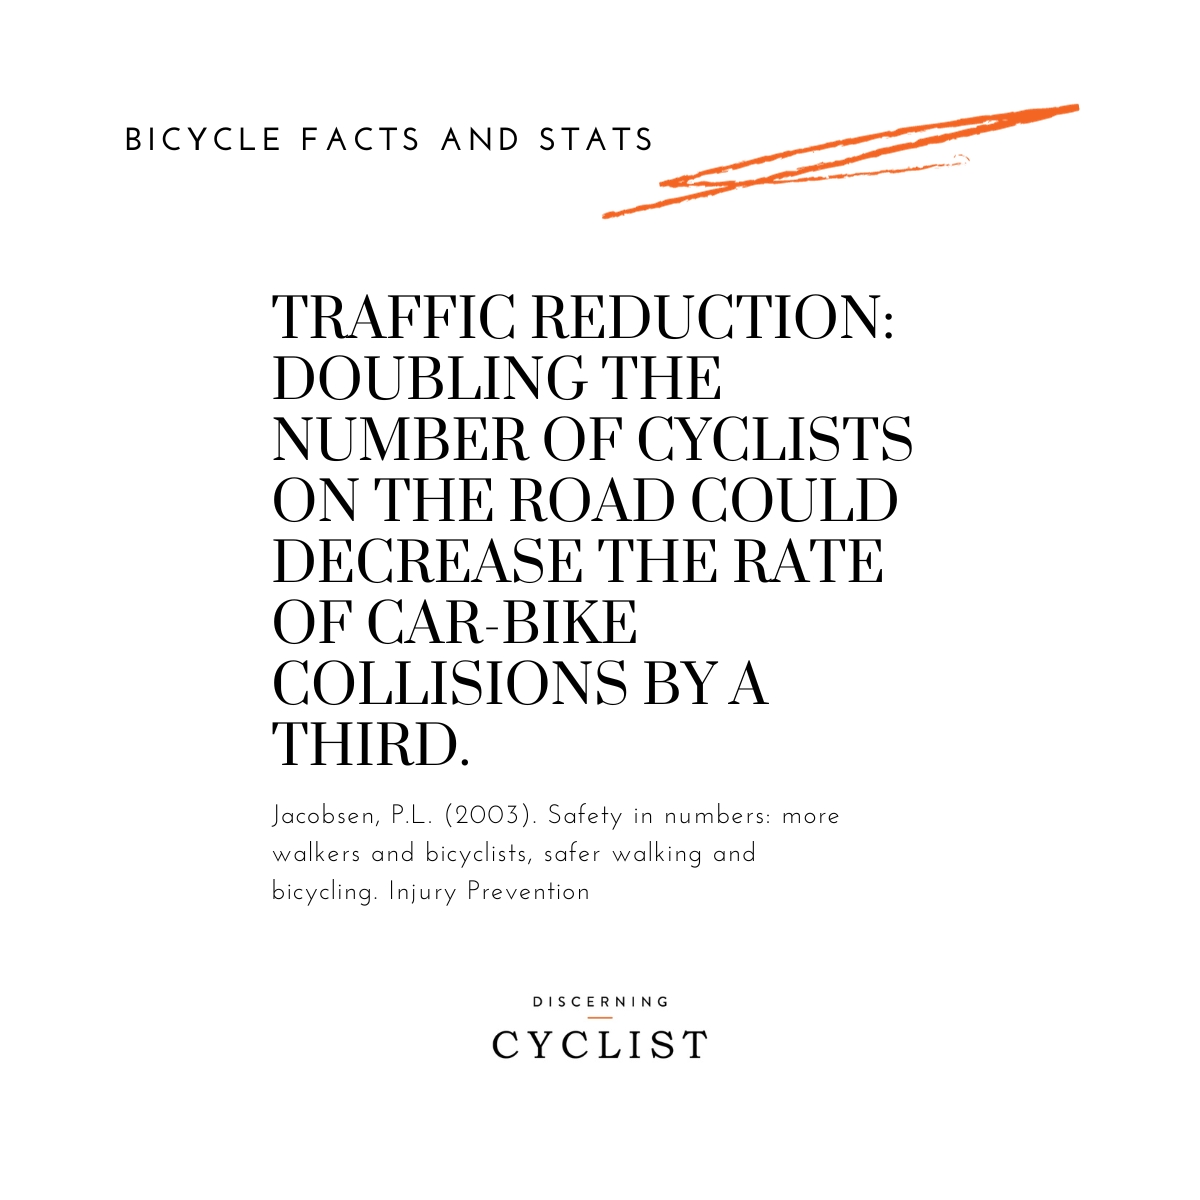 Traffic Reduction: Doubling the number of cyclists on the road could decrease the rate of car-bike collisions by a third.